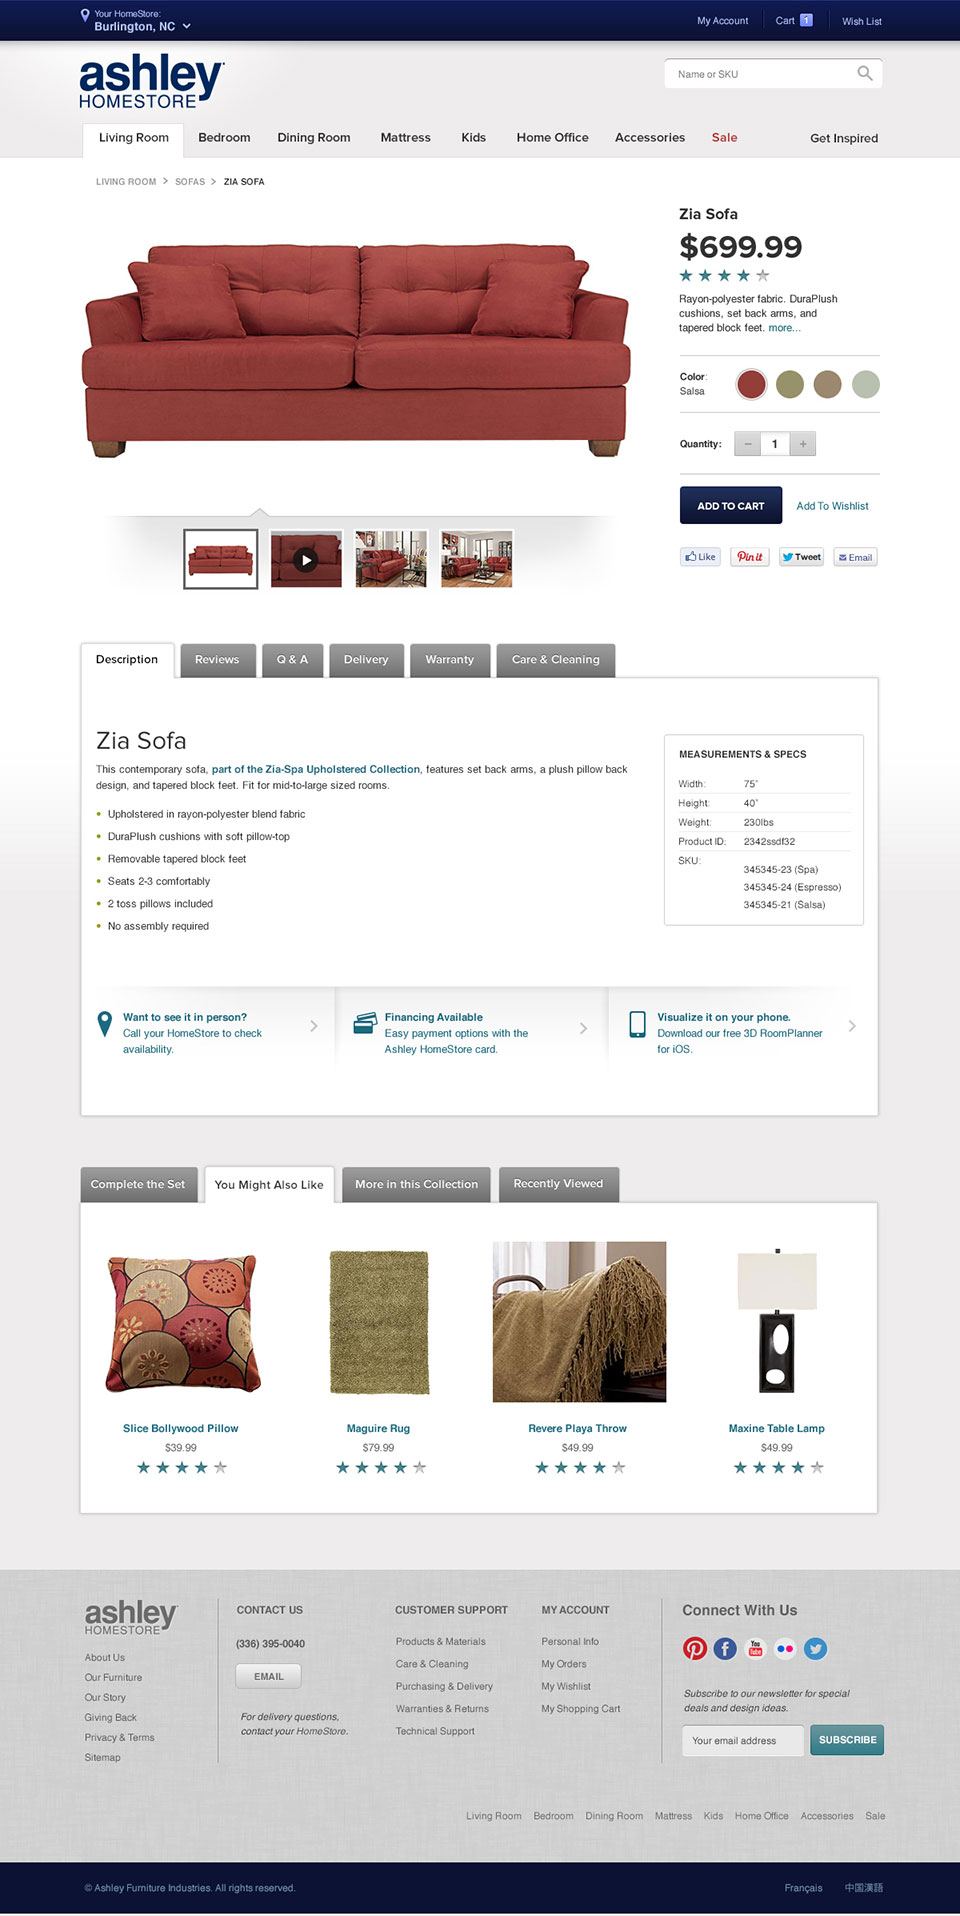 Ashley HomeStore Product Page